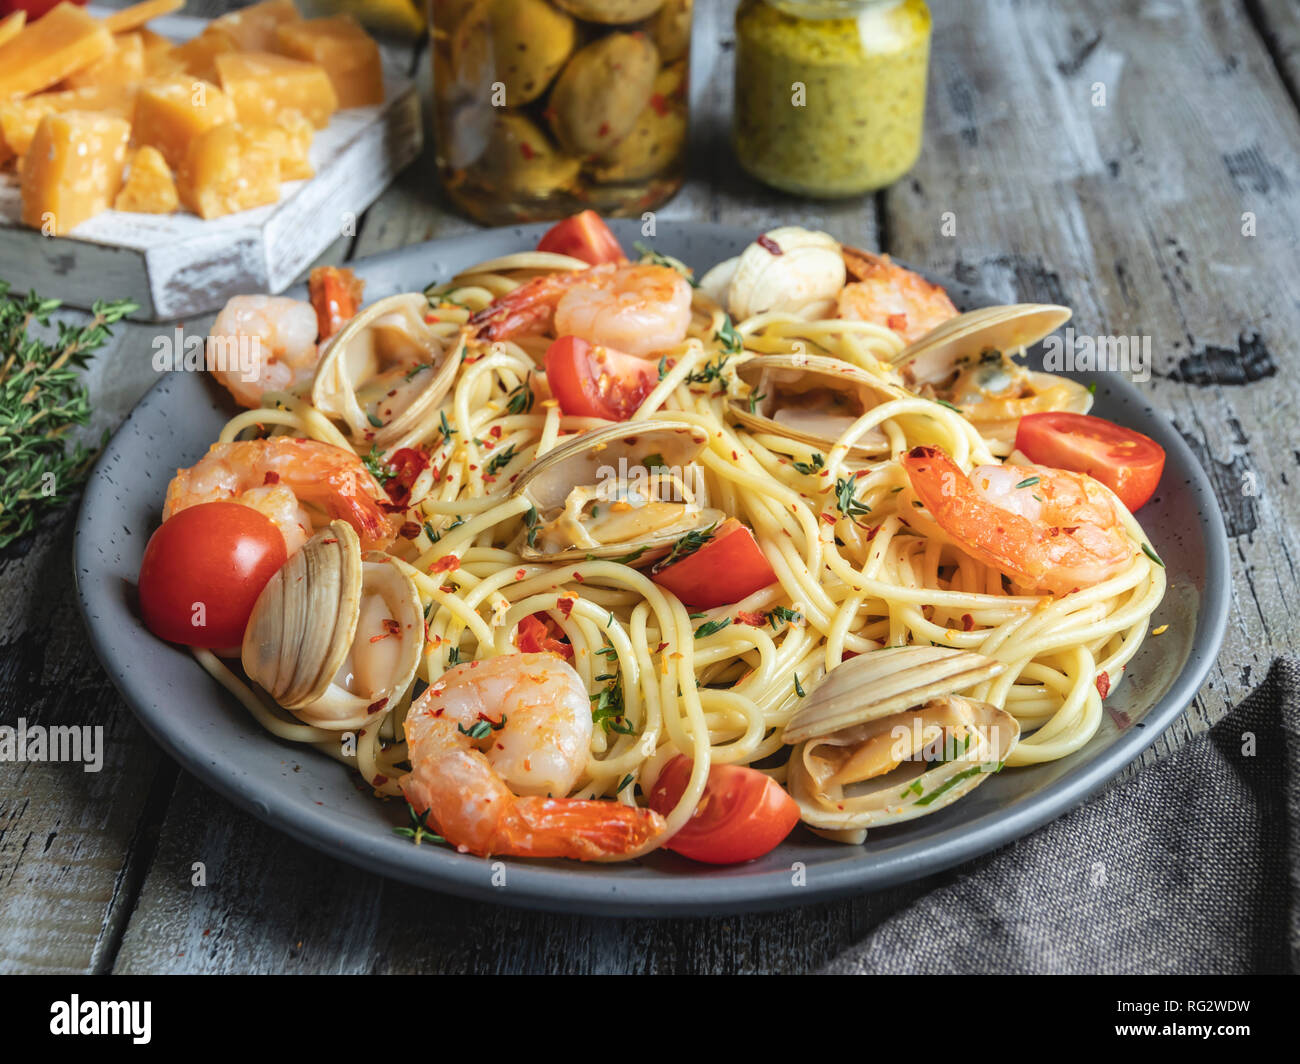 Cooked pasta with seafood clams, shrimps tomato on a plate , spaghetti Stock Photo